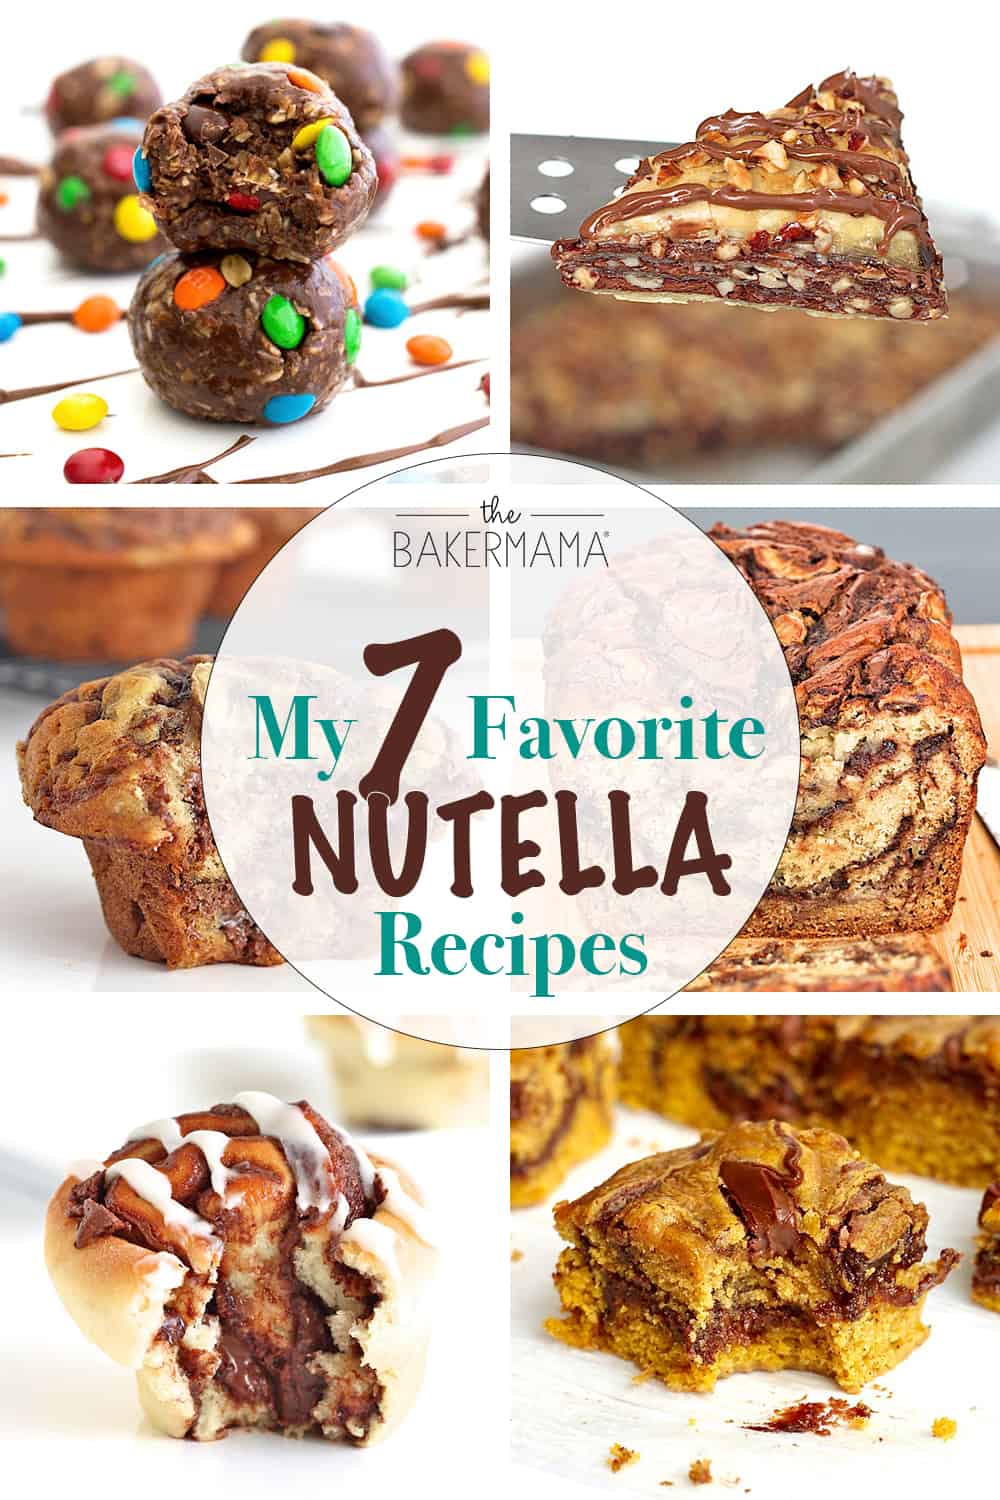 7 Favorite Nutella Recipes by The BakerMama